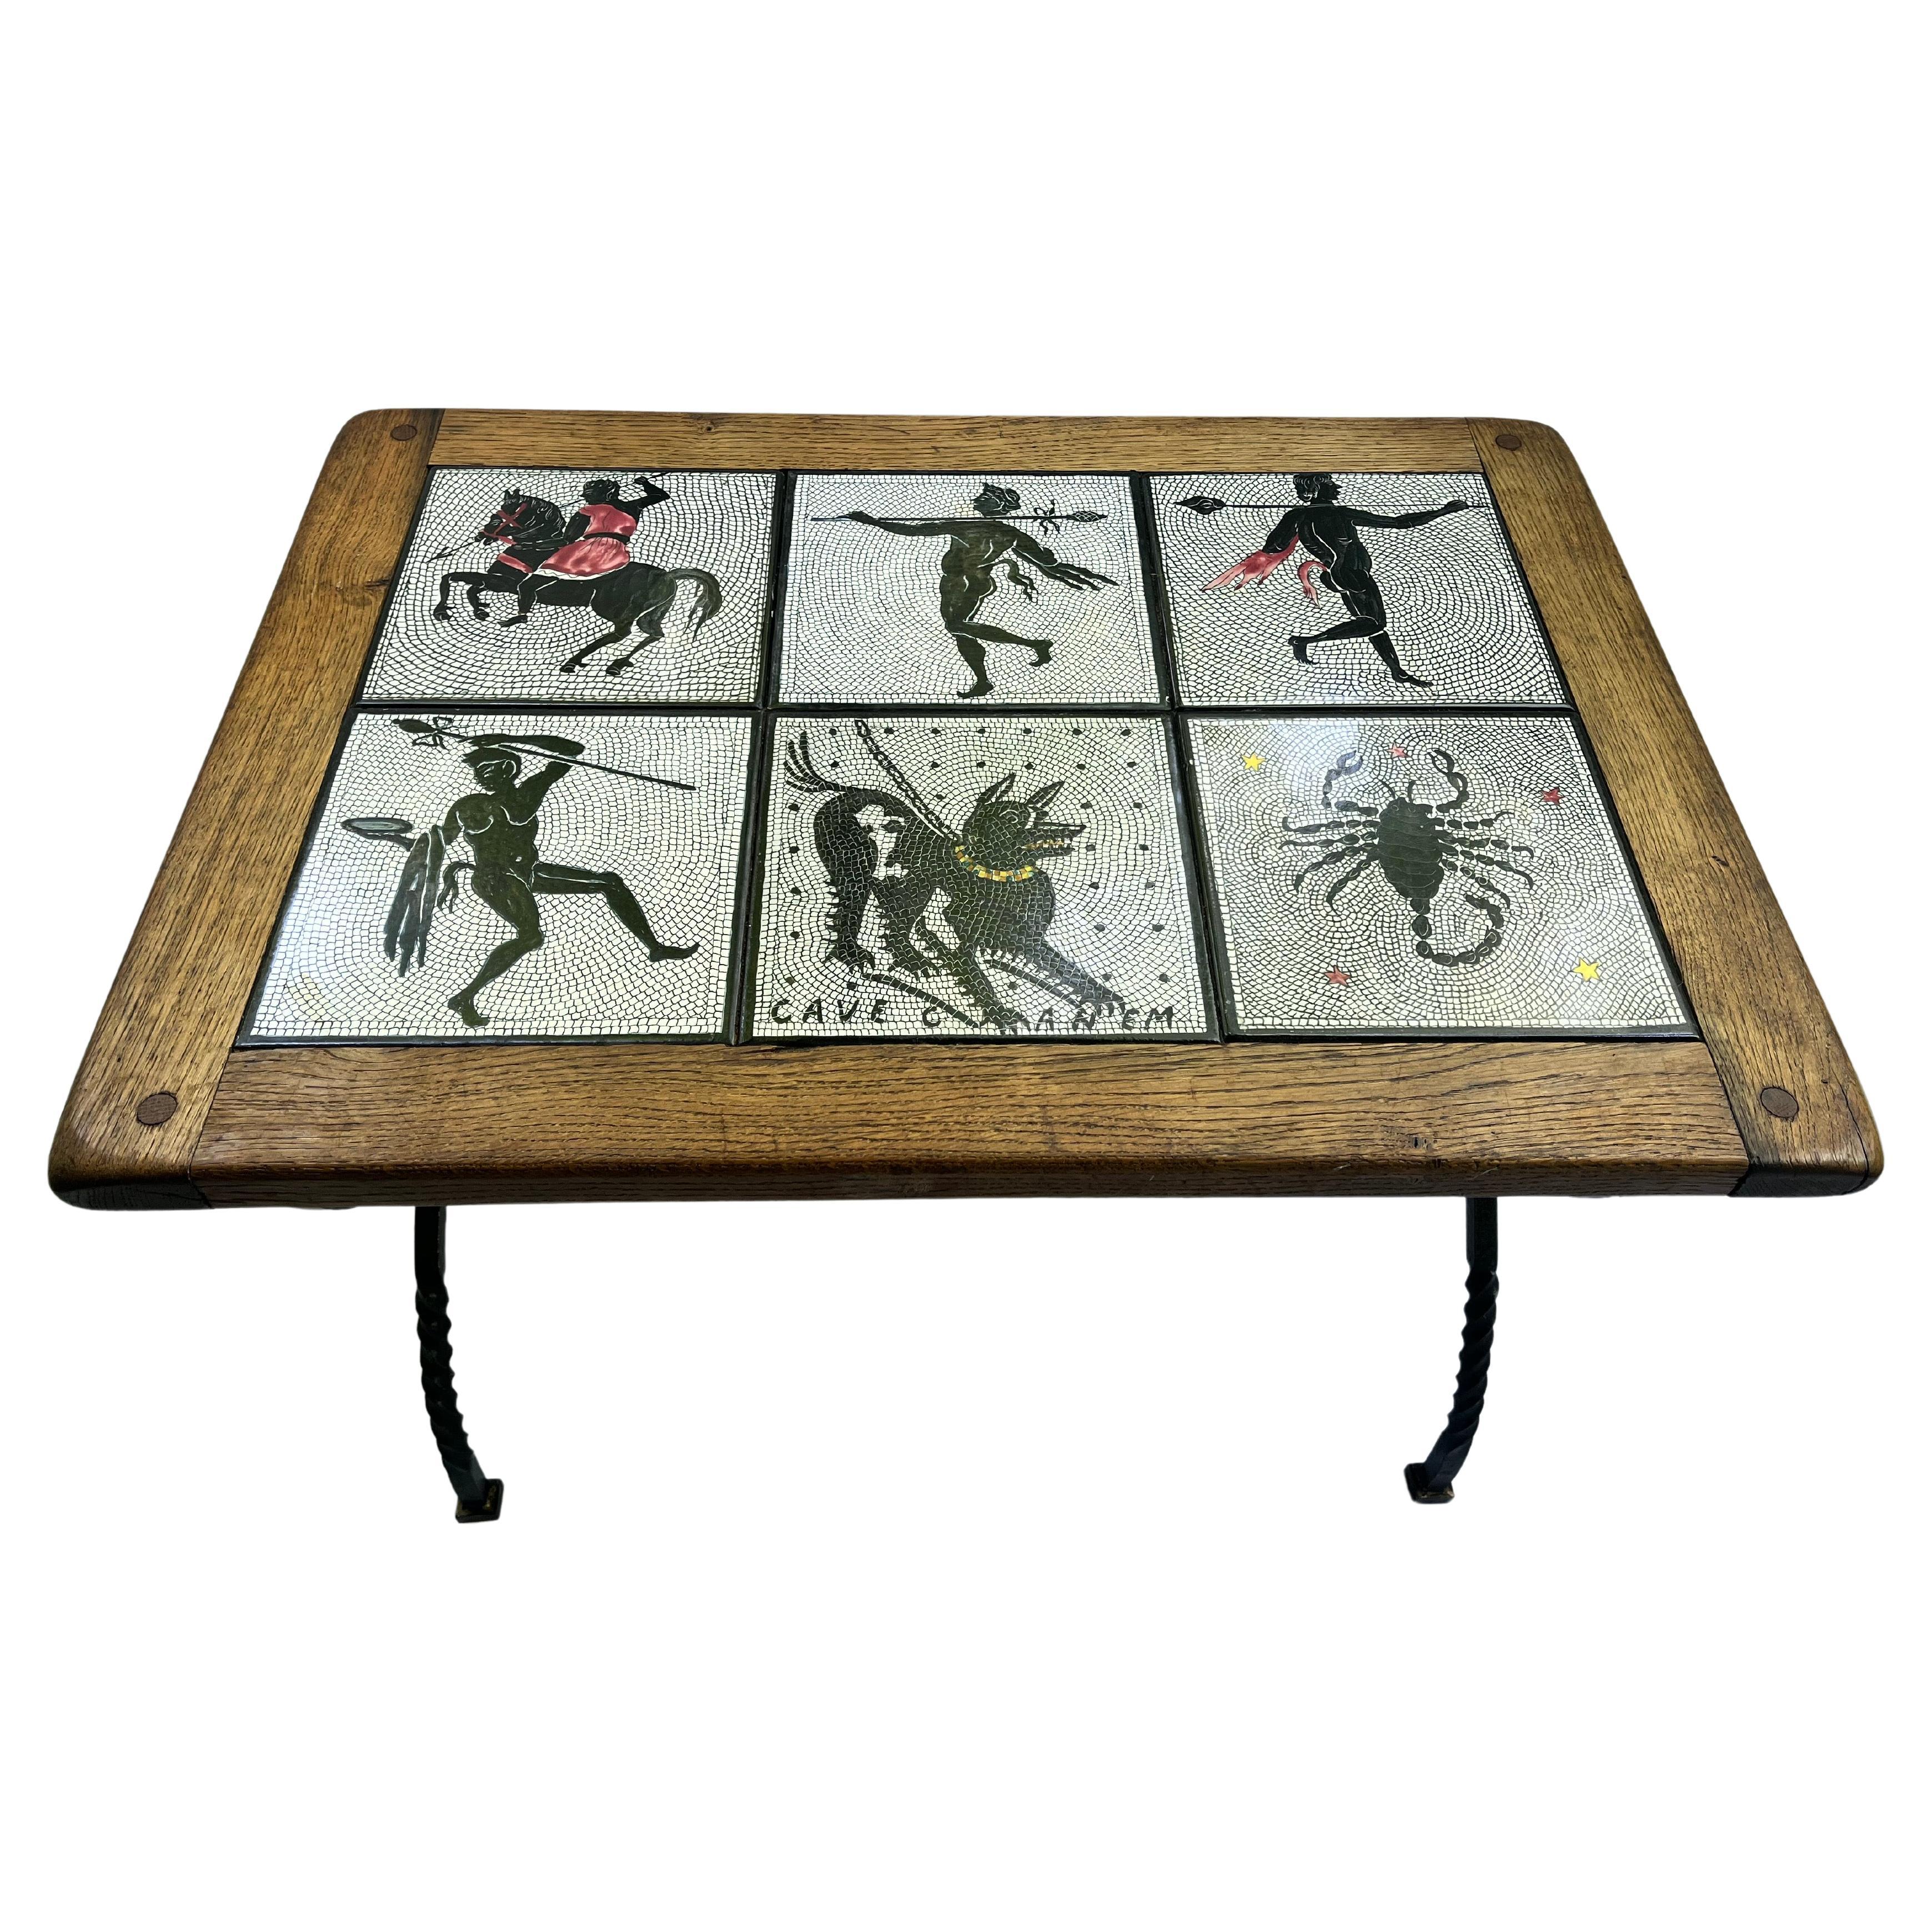 Tragic Poet House Italian Tile Top Wood and Wrought Iron Table Cave Canem Pompei For Sale